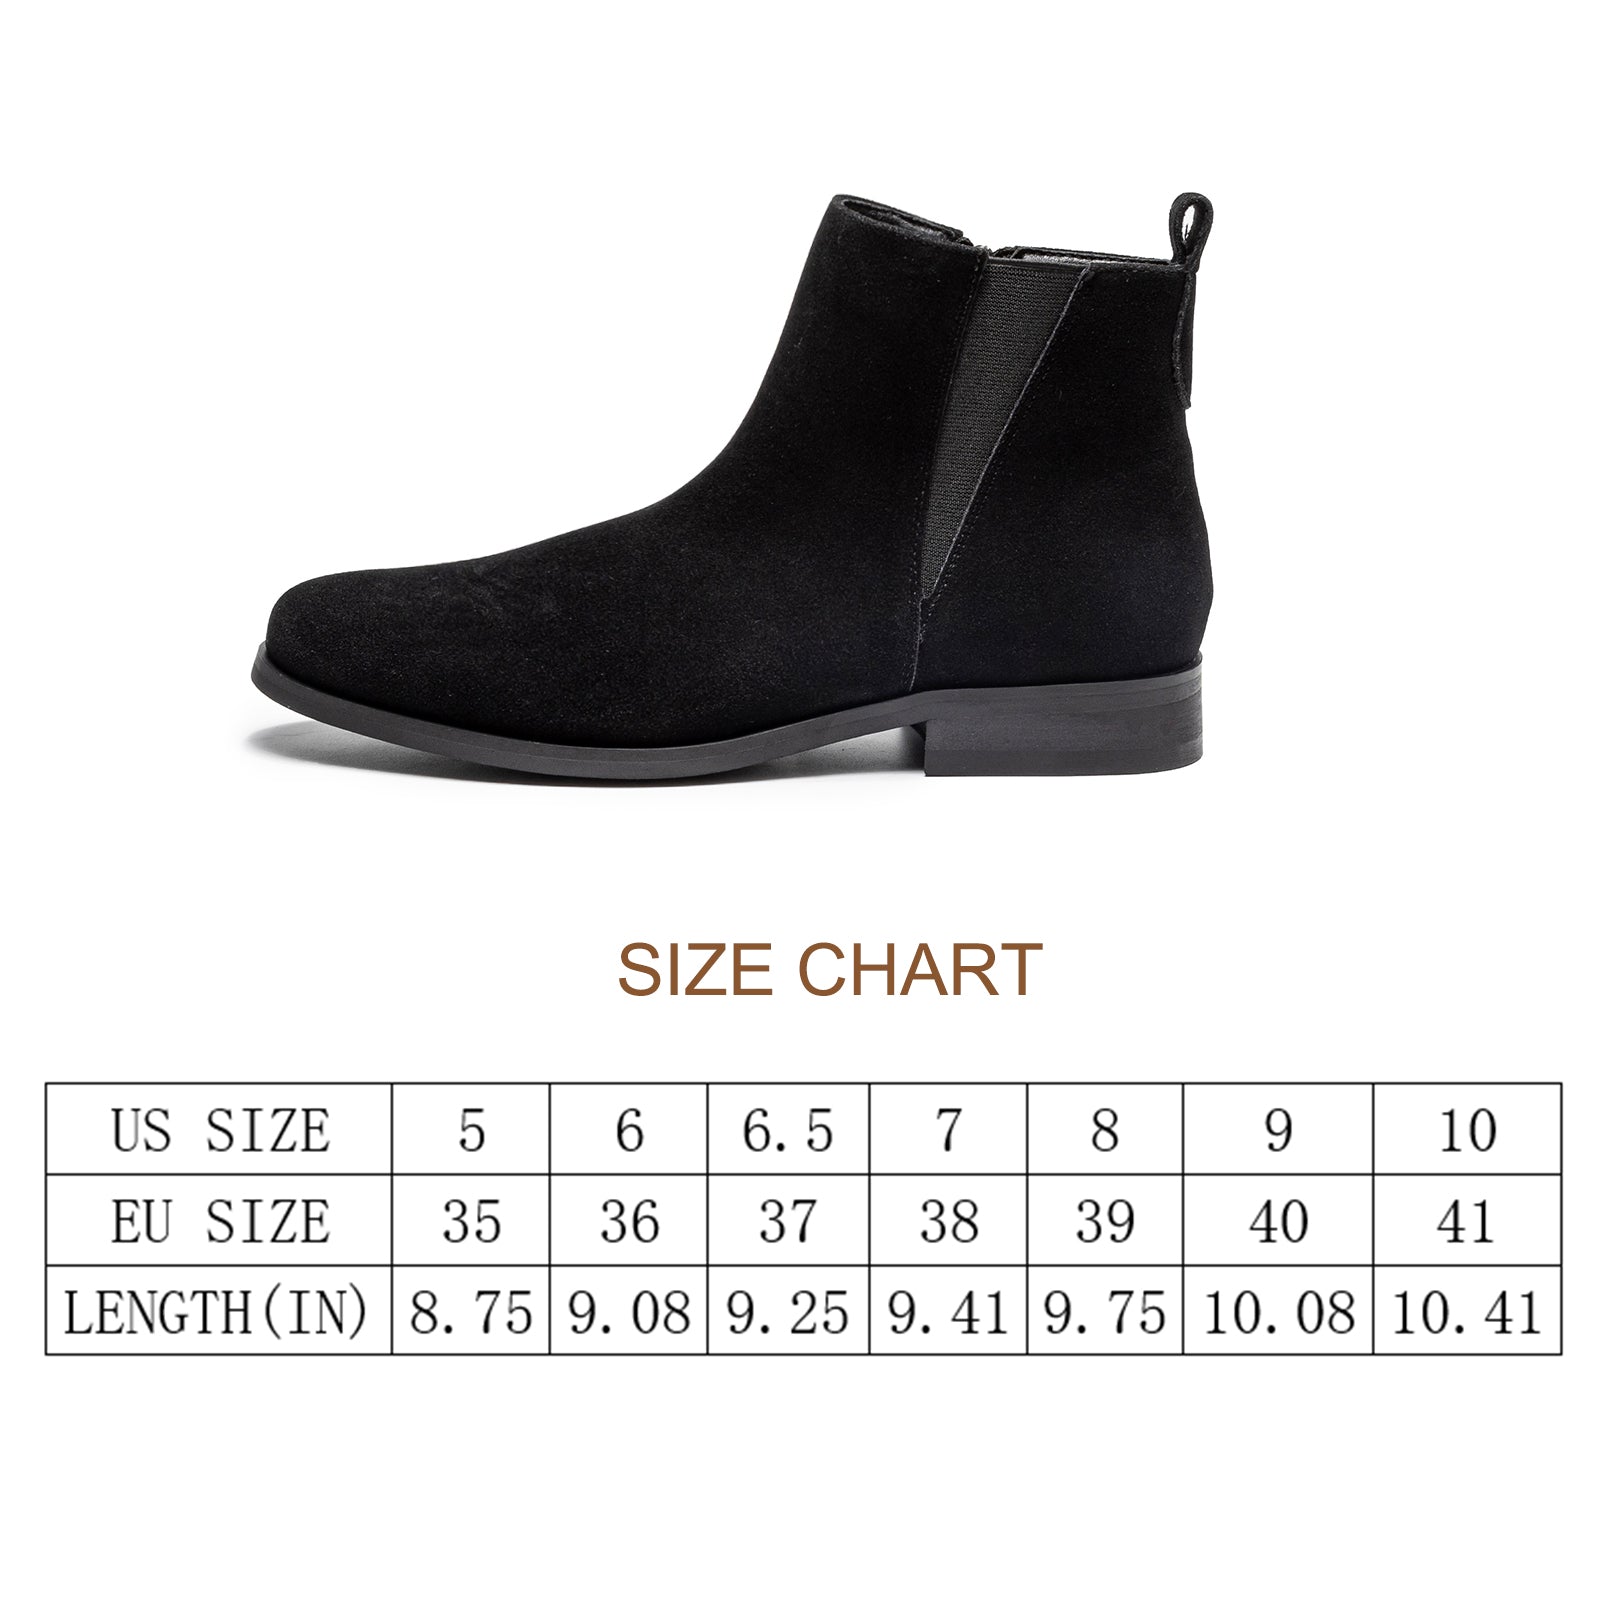 New Womens Ladies Flat Ankle Boots Casual Buckle Side Zip Low Heel Shoes  Sizes | eBay